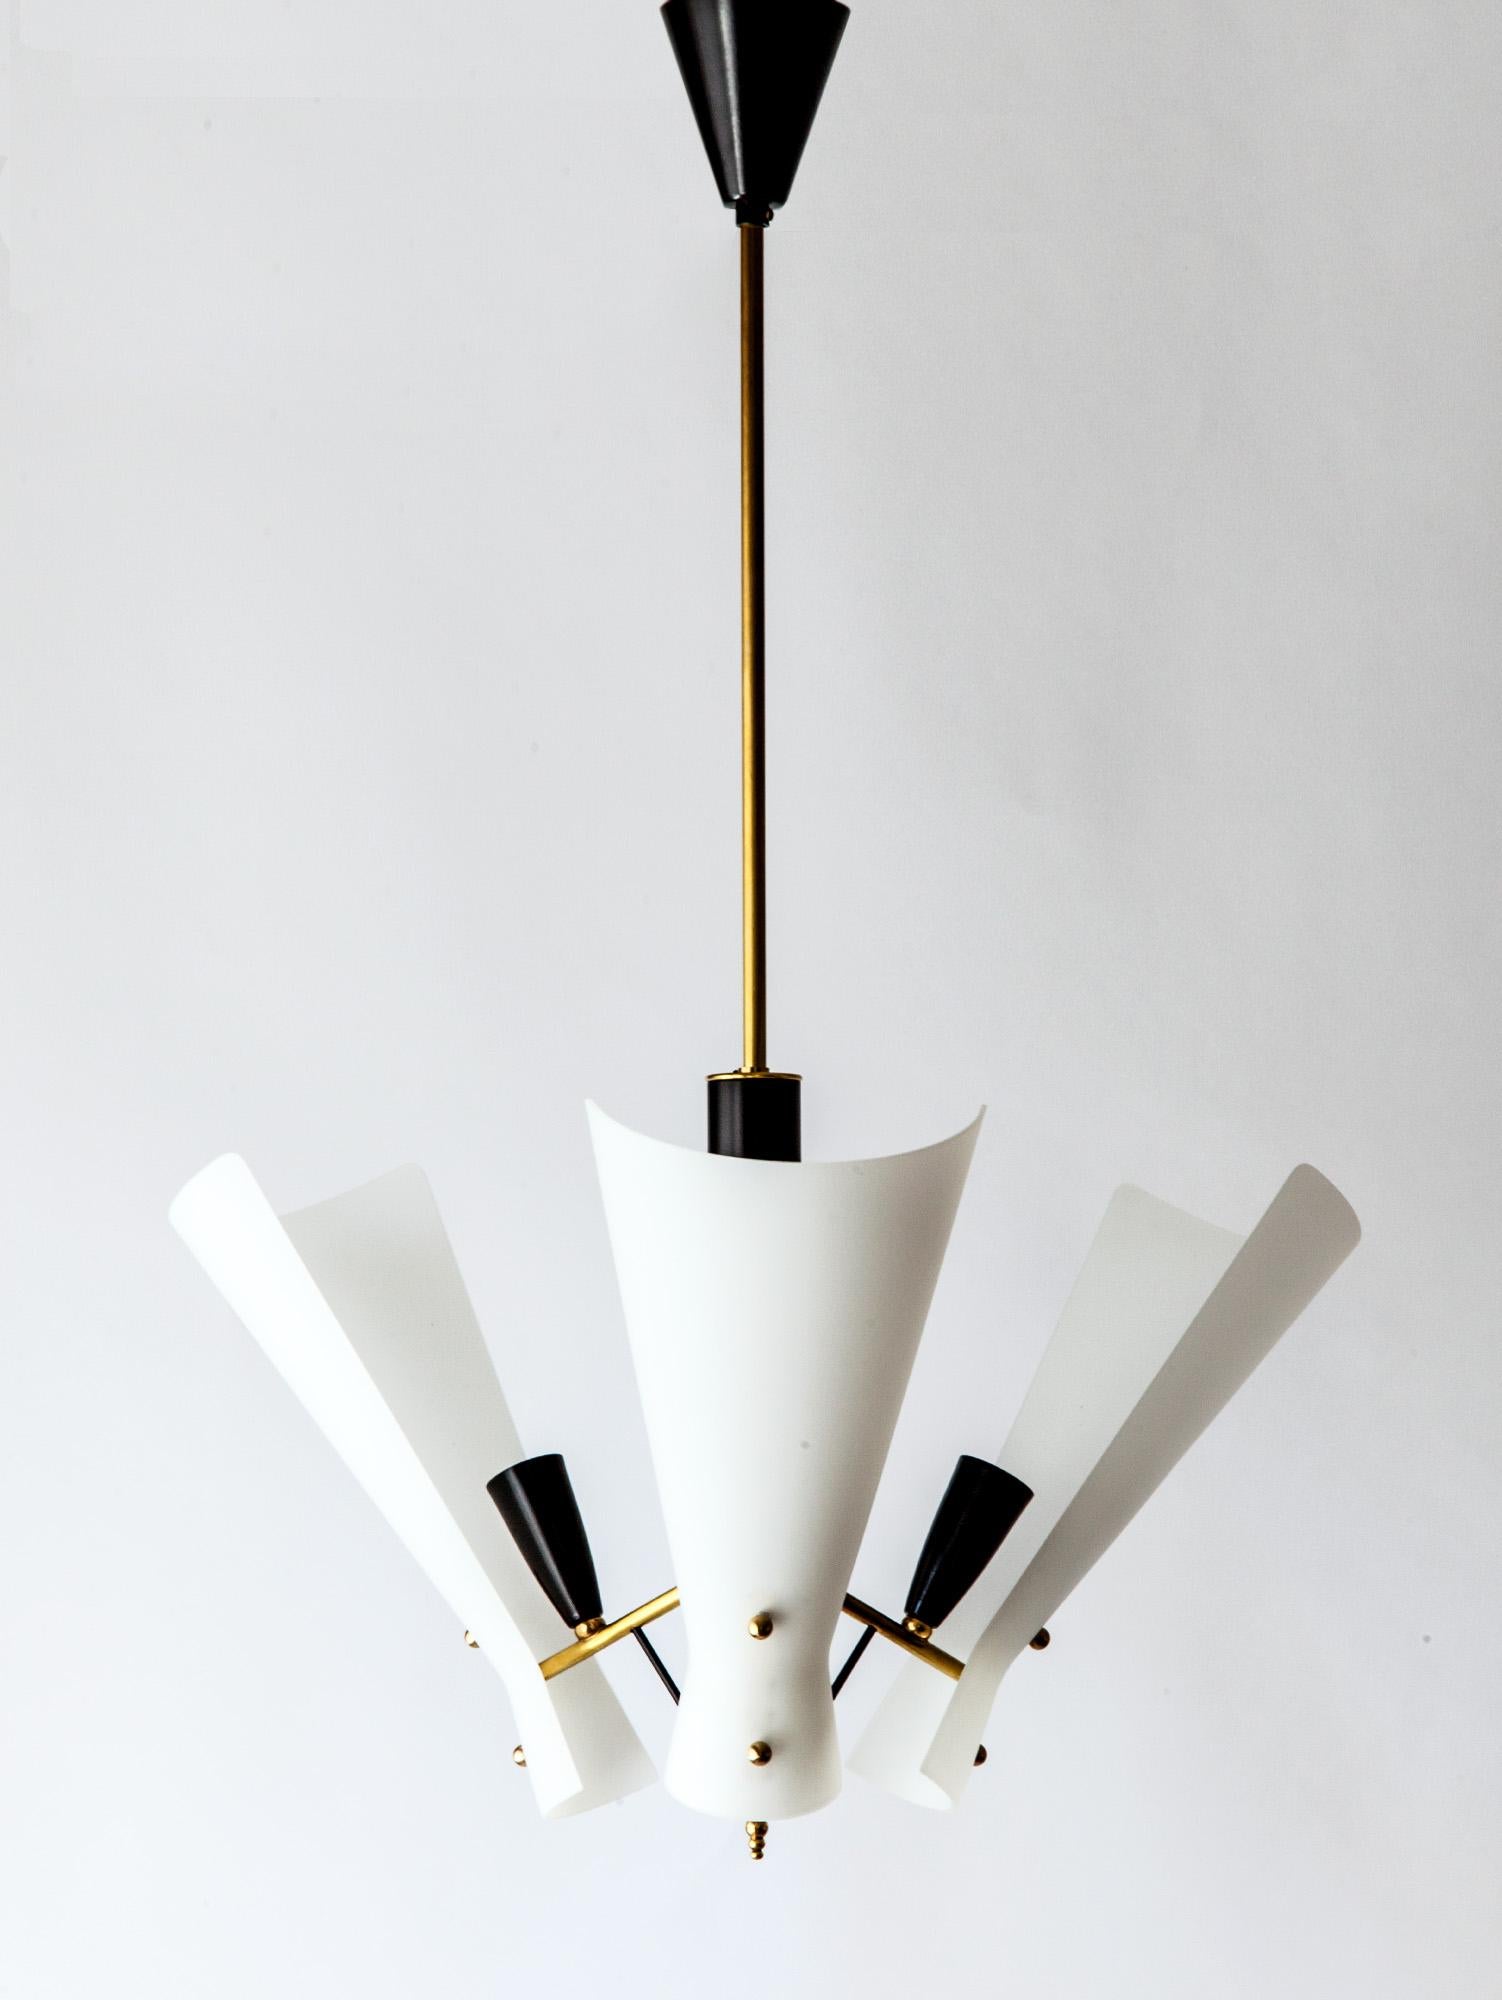 A stunning vintage Italian modernist ceiling light. The white soft milky glass panels contrast against the brass and sharp black details. The angular shape of the glass panels are softened by its round form. Elegant in its design, the pendant